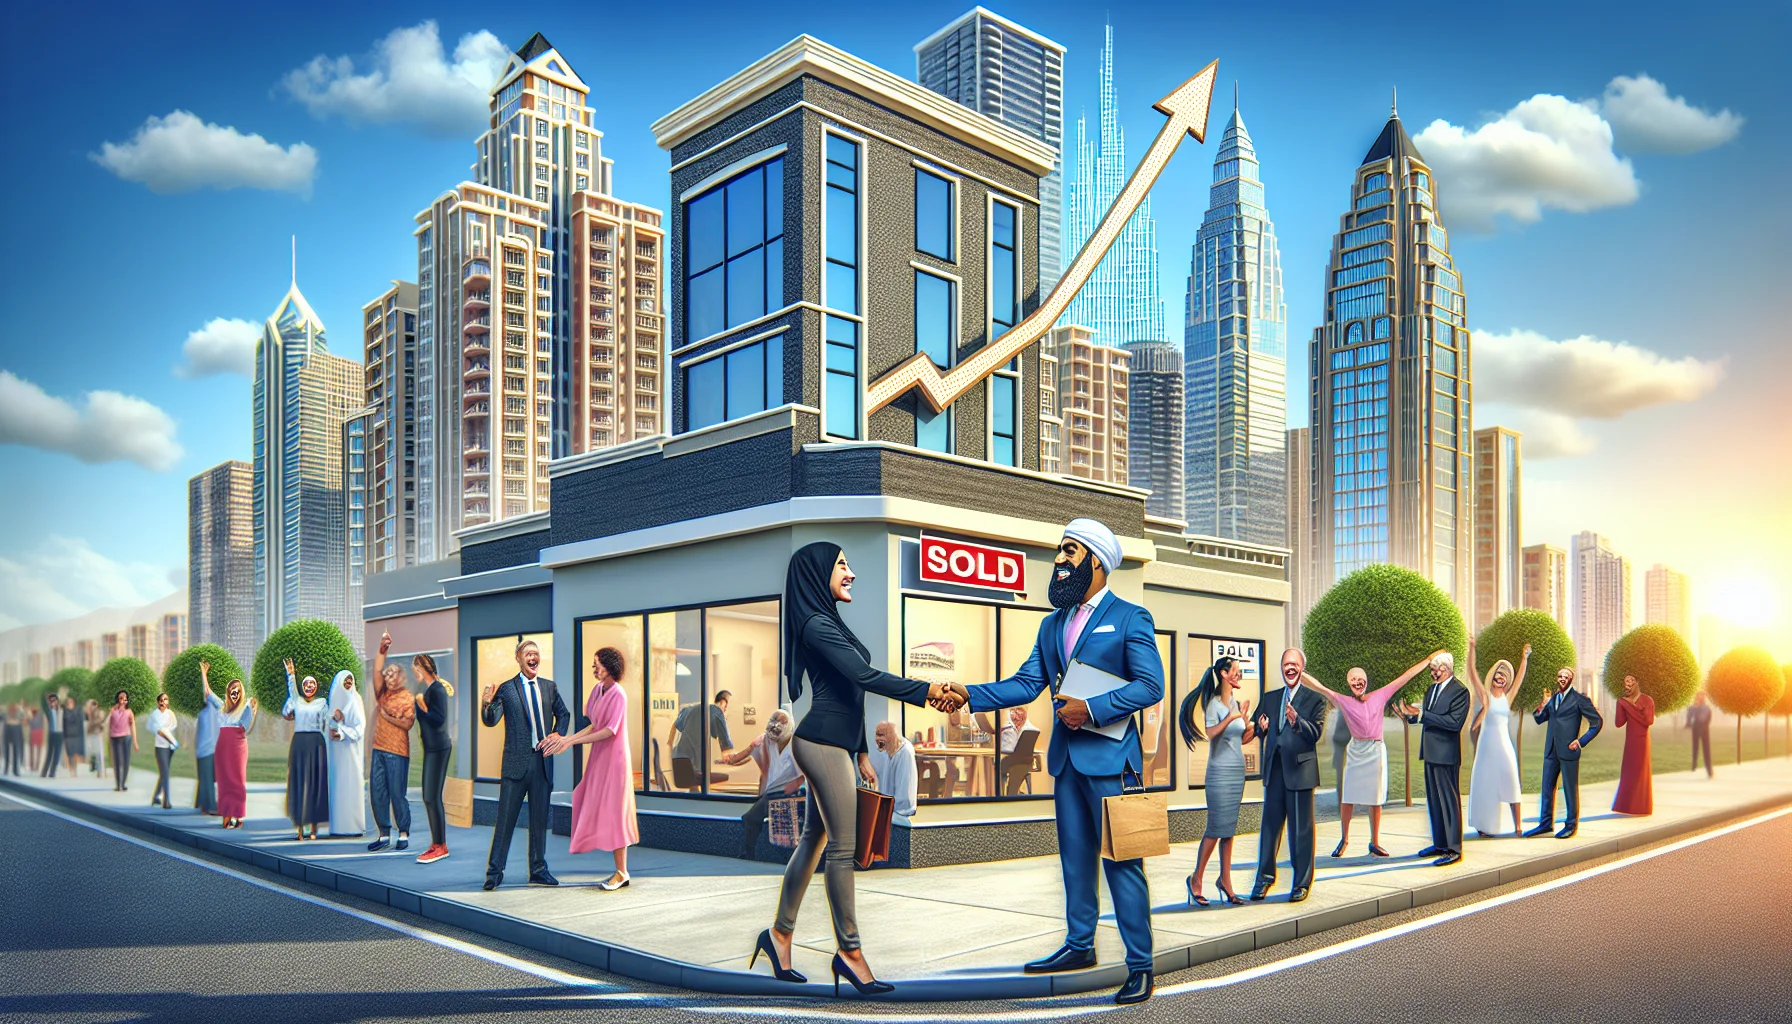 Imagine a jovial scene perfectly encapsulating the best scenario for real estate investment. In the foreground, a delighted, black female real estate investor shaking hands with her Middle-Eastern male client in front of a pristine commercial building. The edifice has a 'SOLD' sign posted. In the background, soaring property values are represented through a graph with a skyward arrow, embodied into the lively cityscape itself. Further in the scene, people of various descents and genders are joyfully celebrating successful investments near other well-kept buildings. A clear sky reflects a bright, prosperous day for real estate.